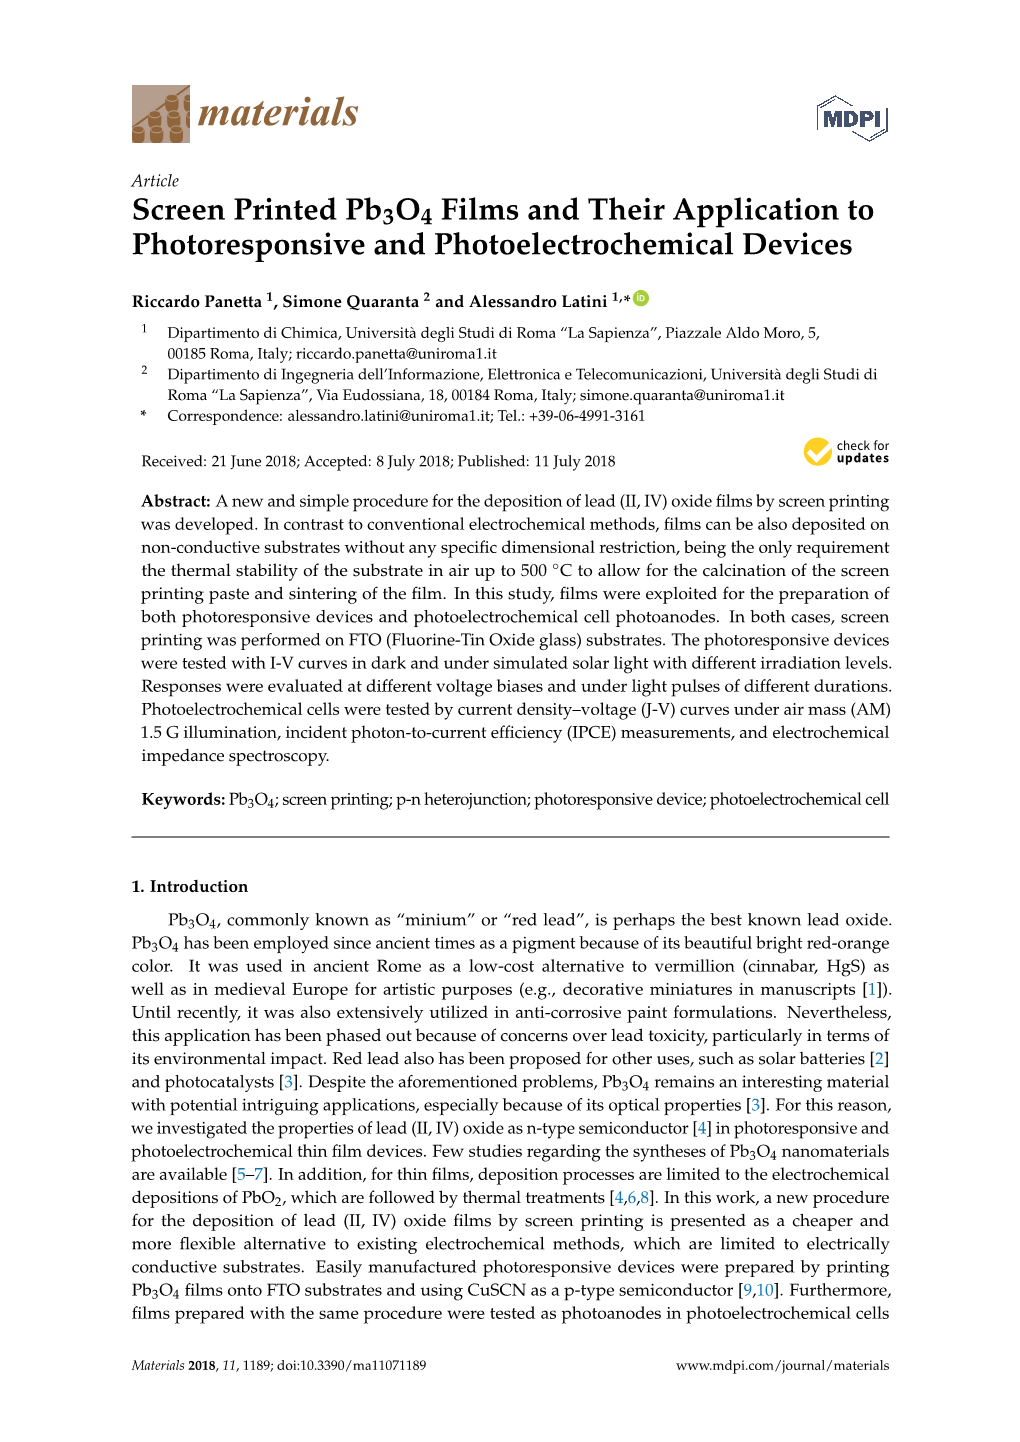 Screen Printed Pb3o4 Films and Their Application to Photoresponsive and Photoelectrochemical Devices